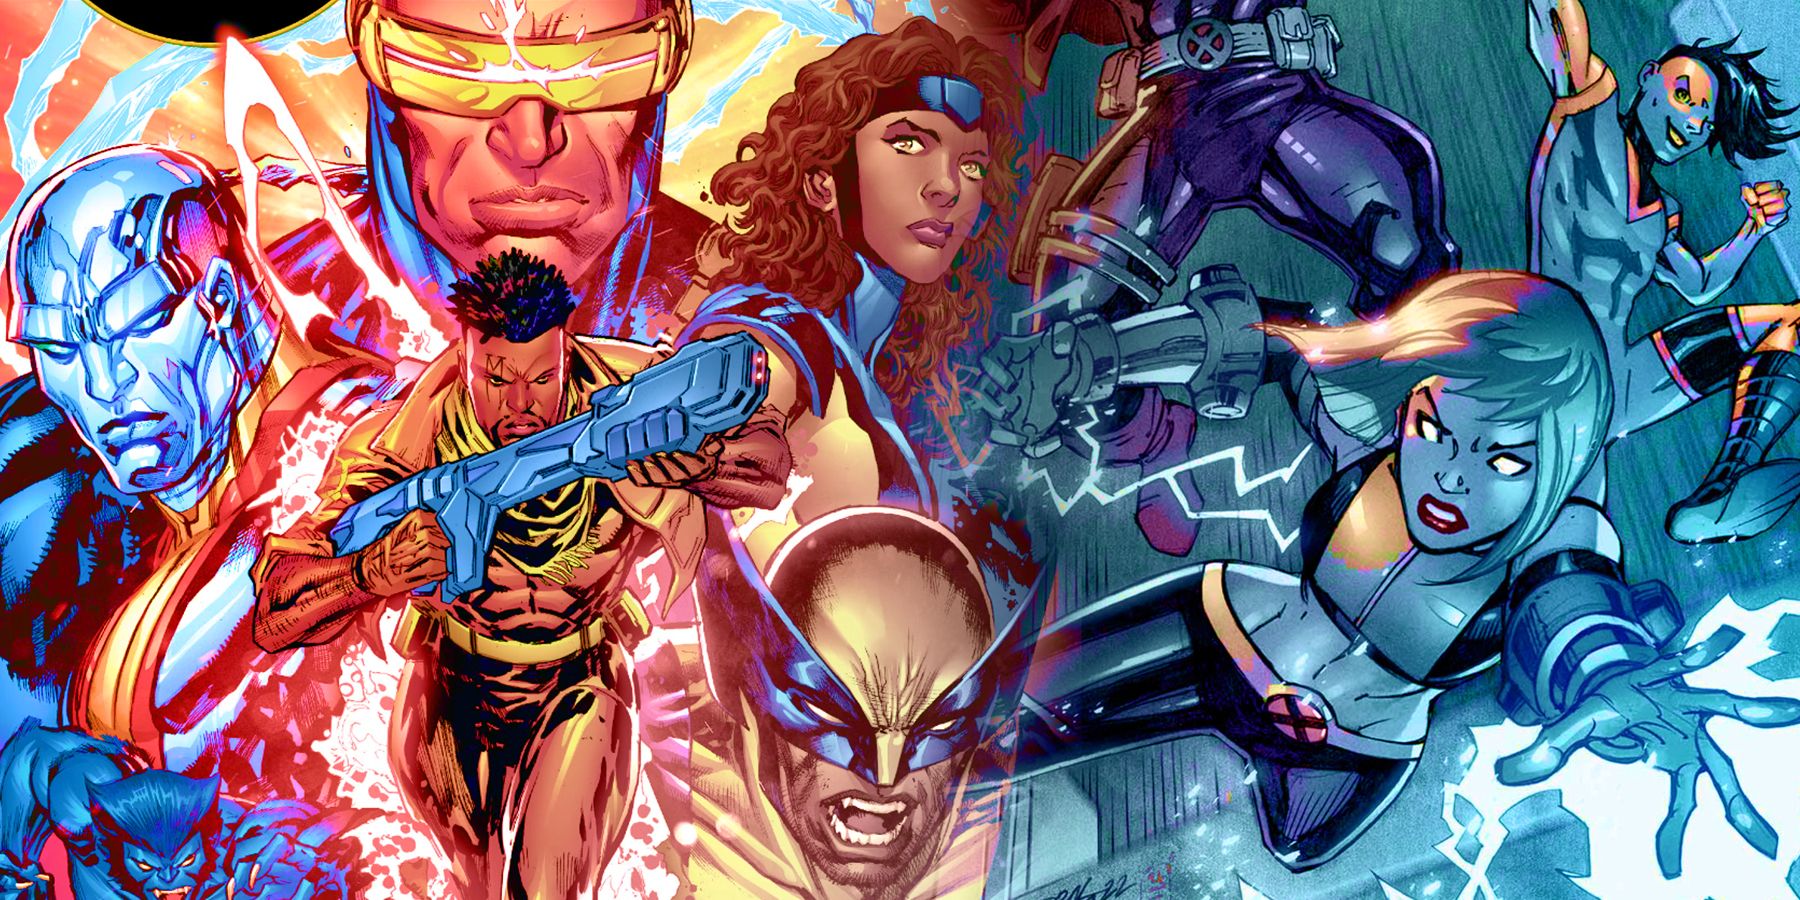 Marvel's Latest X-Men Series Faces the Hypocrisy in the Team's History Head-On